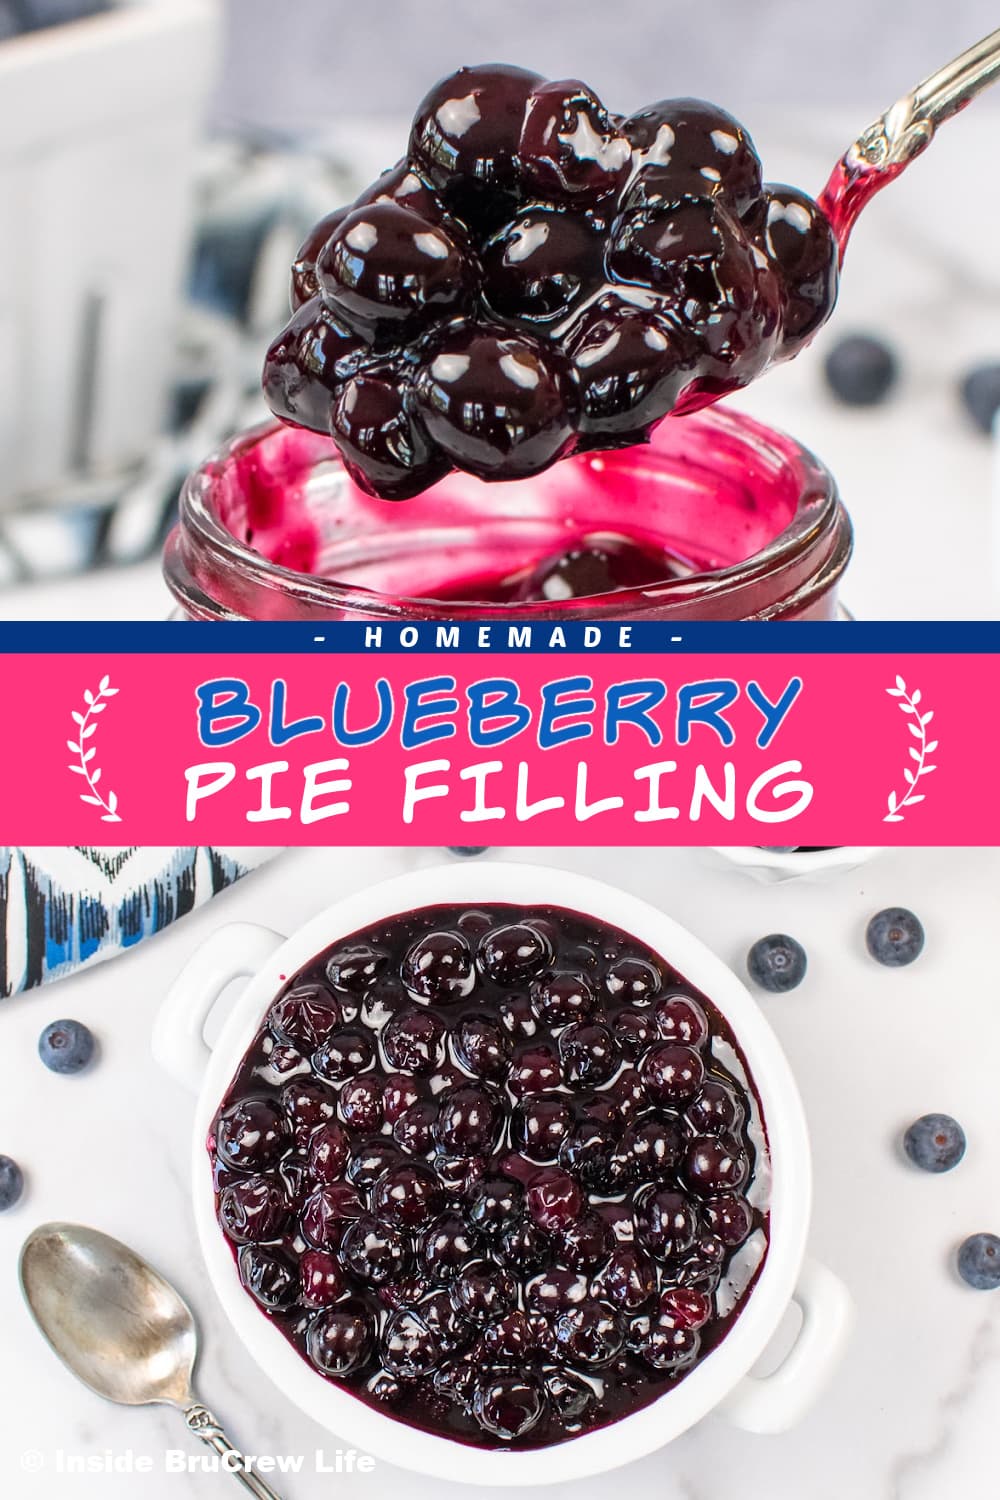 Two pictures of blueberry filling collaged together with a pink text box.